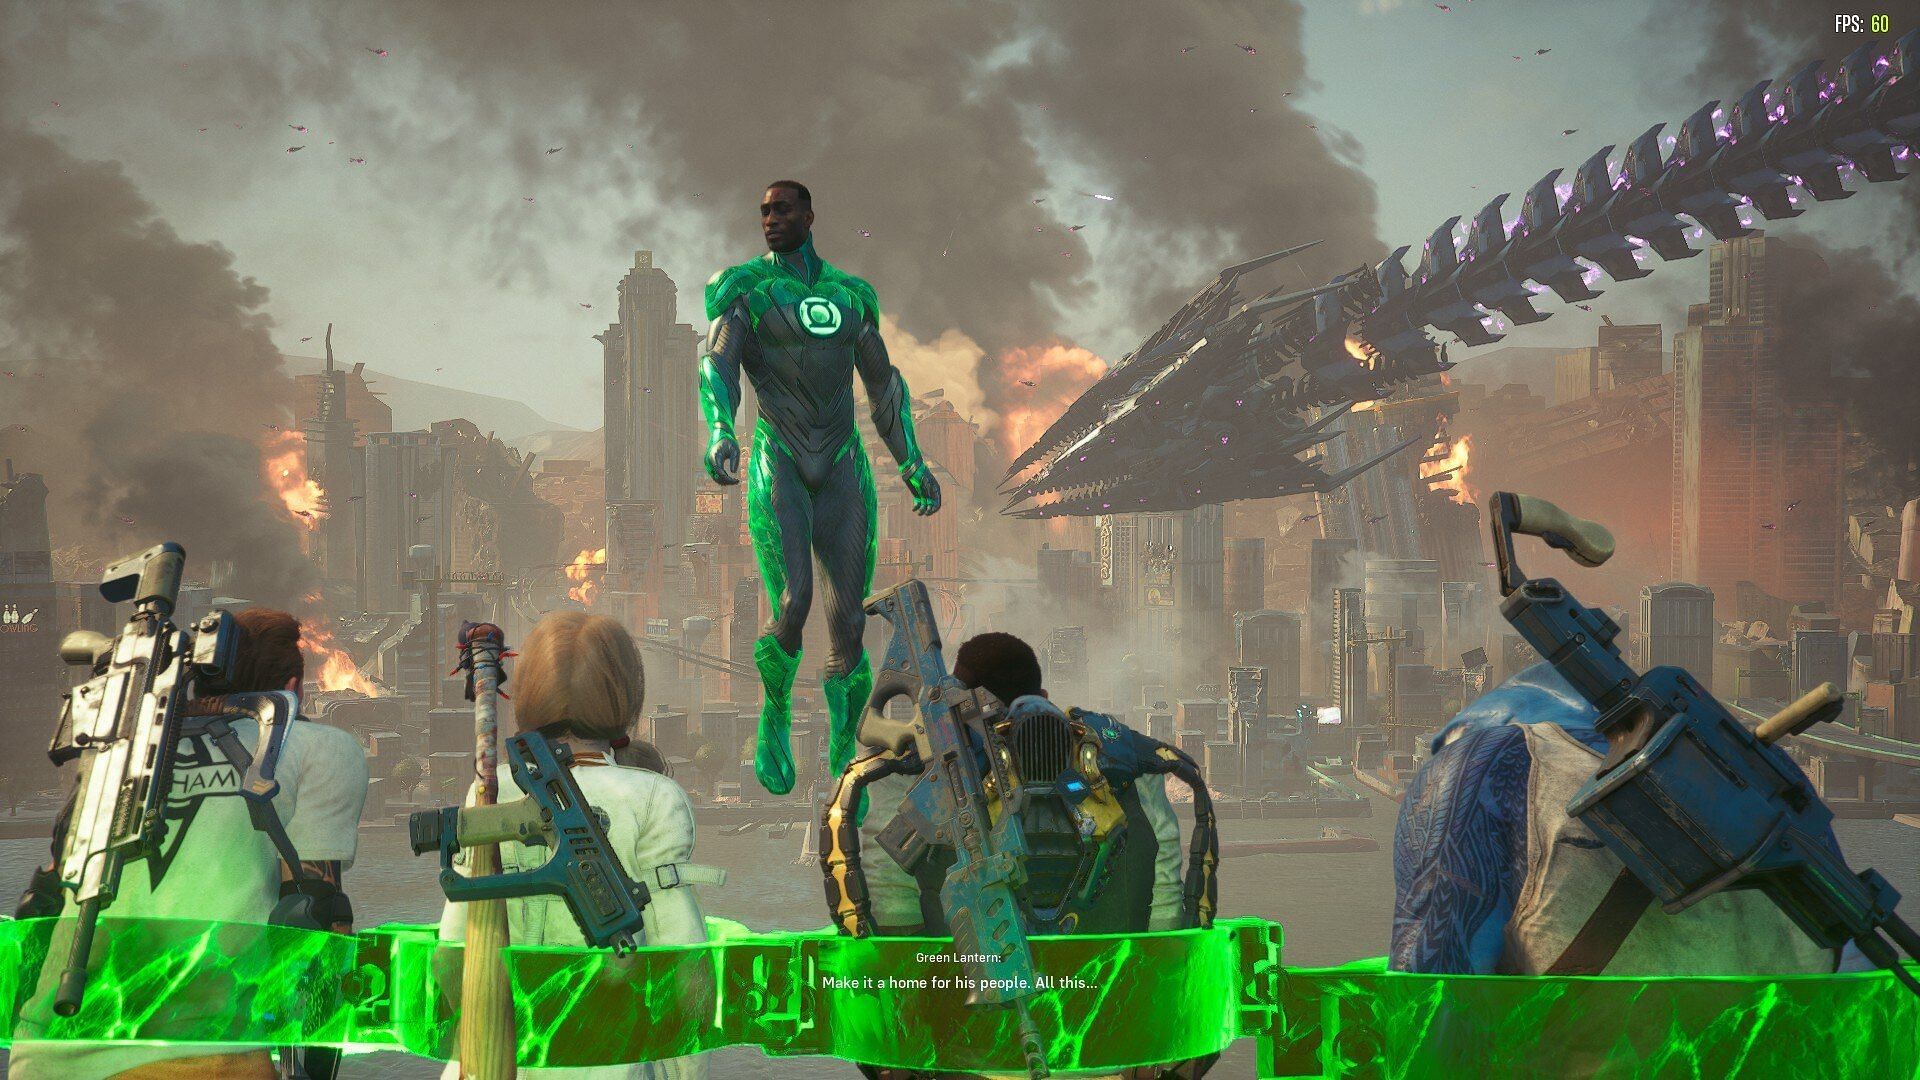 Green Lantern is the first Justice League member you get to meet in Suicide Squad Kill the Justice League. (Image via Rocksteady Studios)